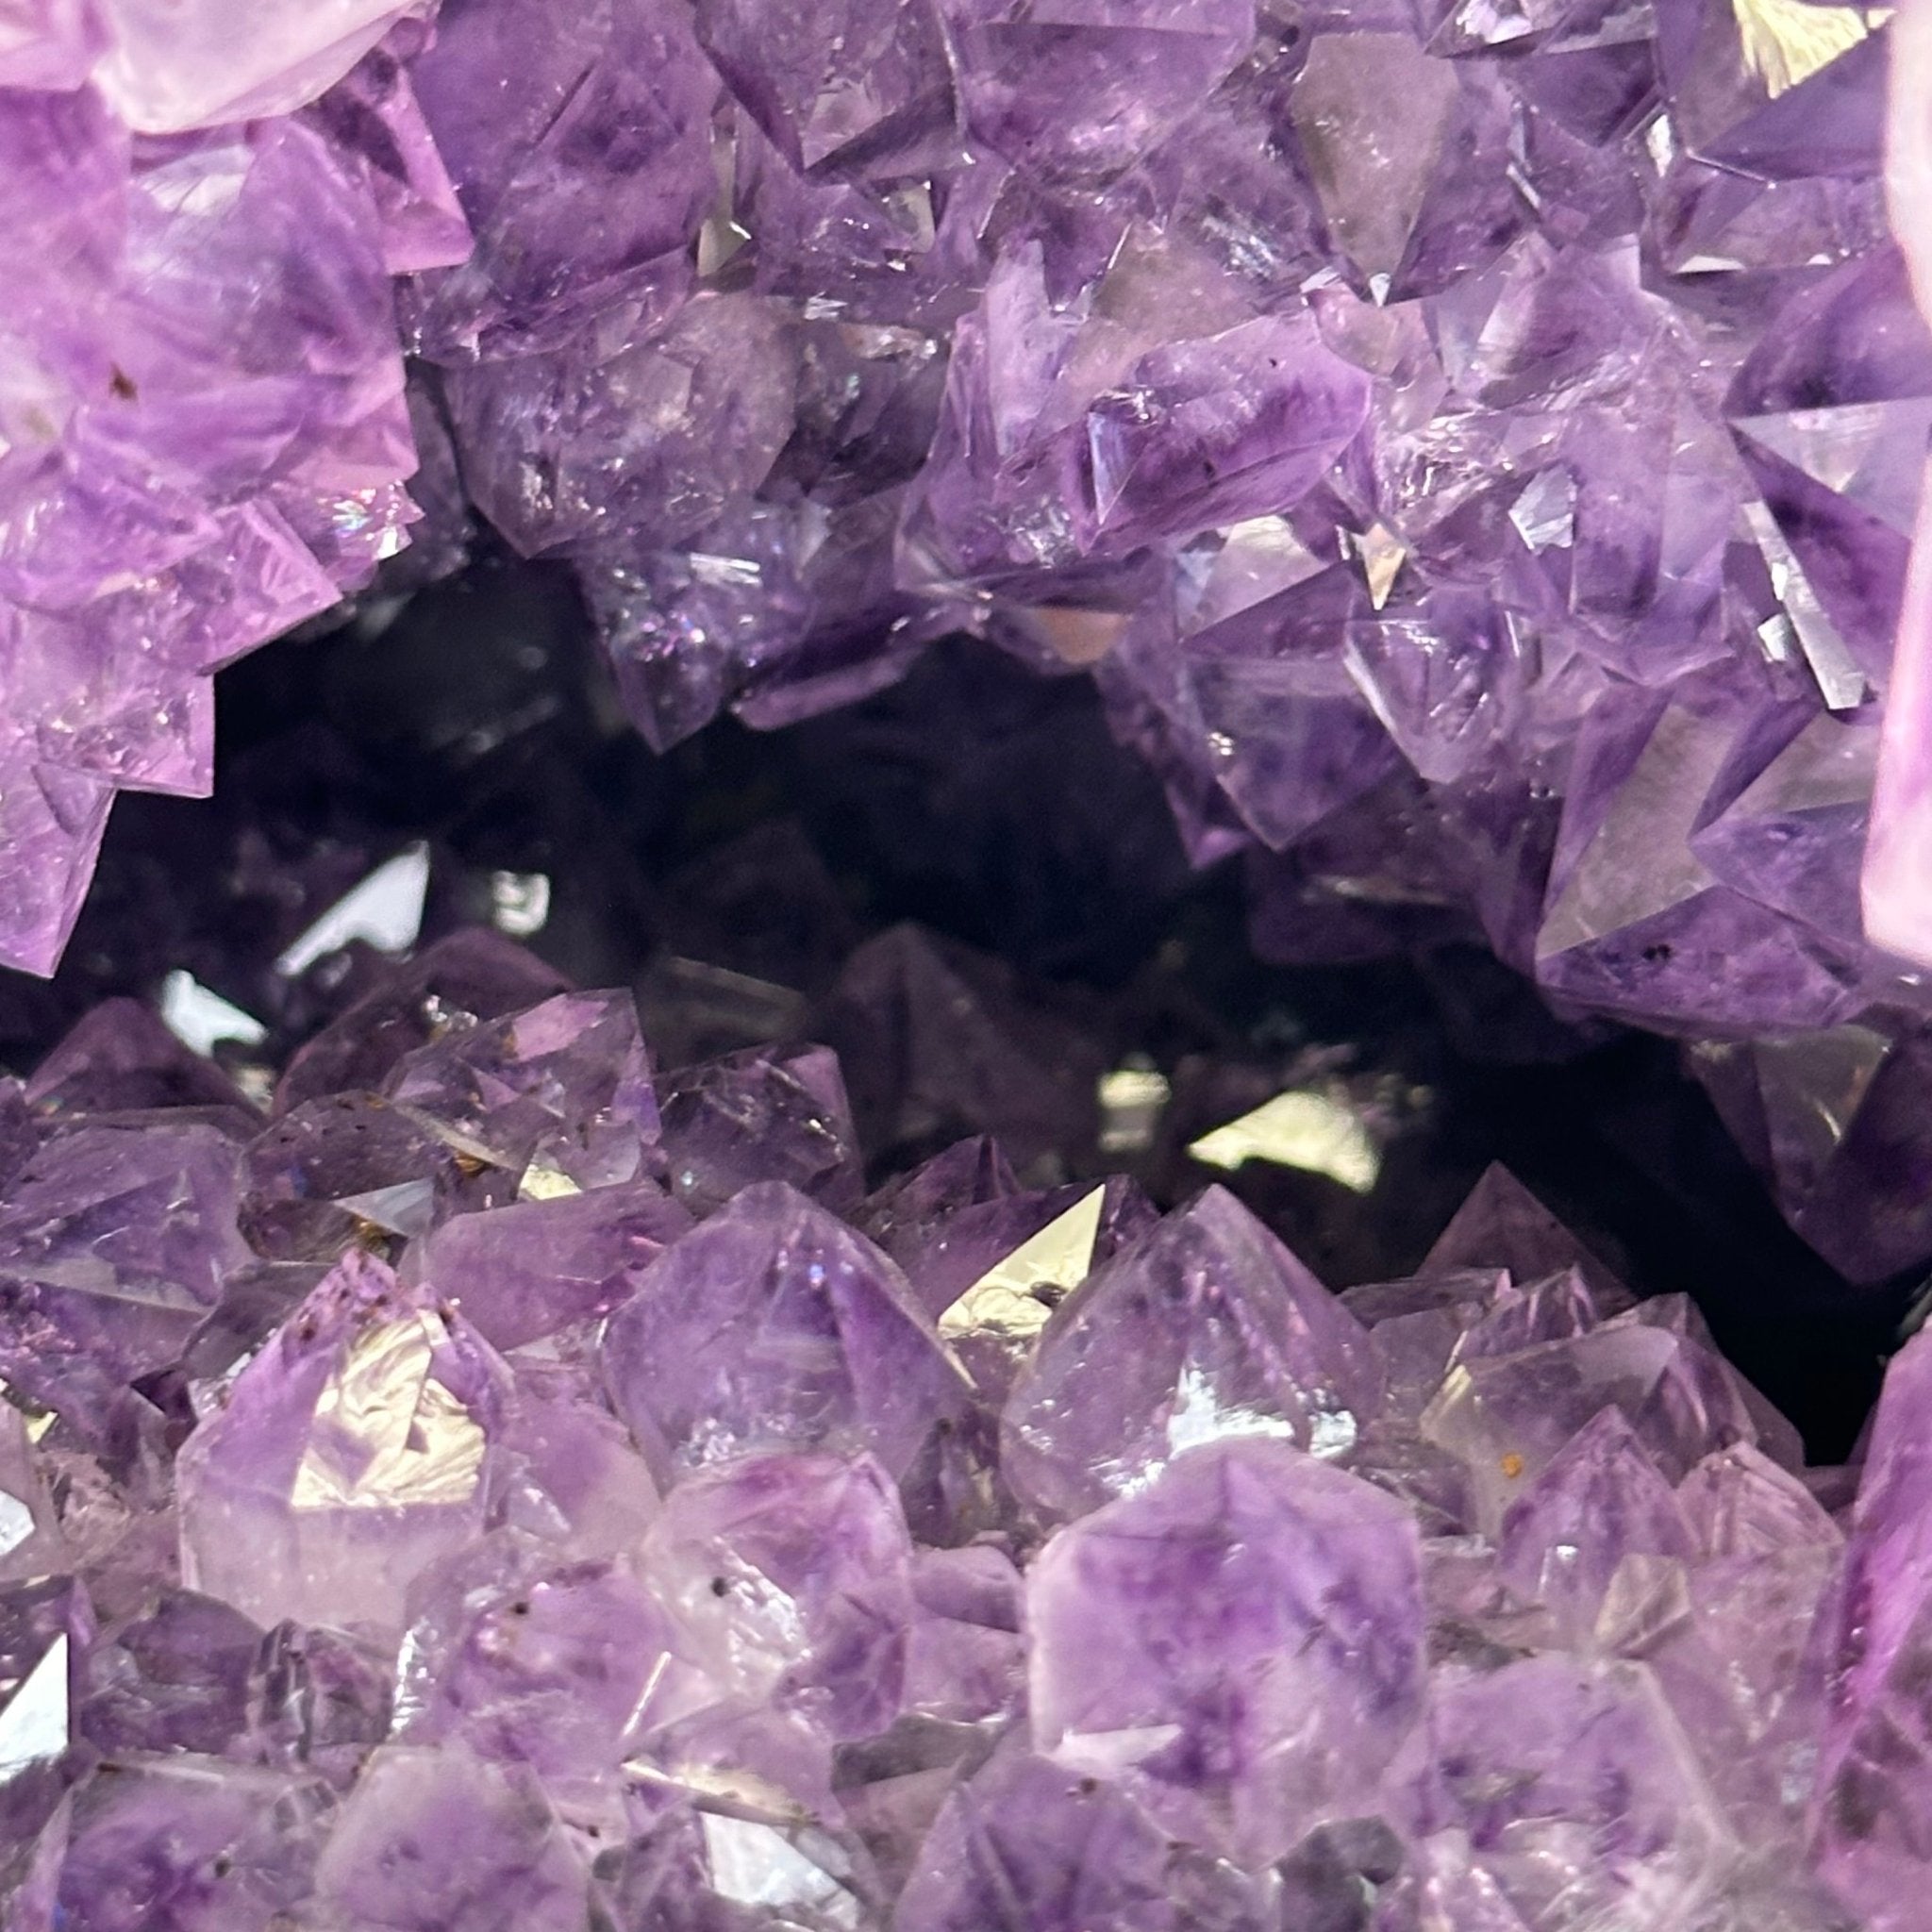 Quality Brazilian Amethyst Cathedral, 13.5 lbs & 9.4" Tall, #5601 - 1364 - Brazil GemsBrazil GemsQuality Brazilian Amethyst Cathedral, 13.5 lbs & 9.4" Tall, #5601 - 1364Cathedrals5601 - 1364